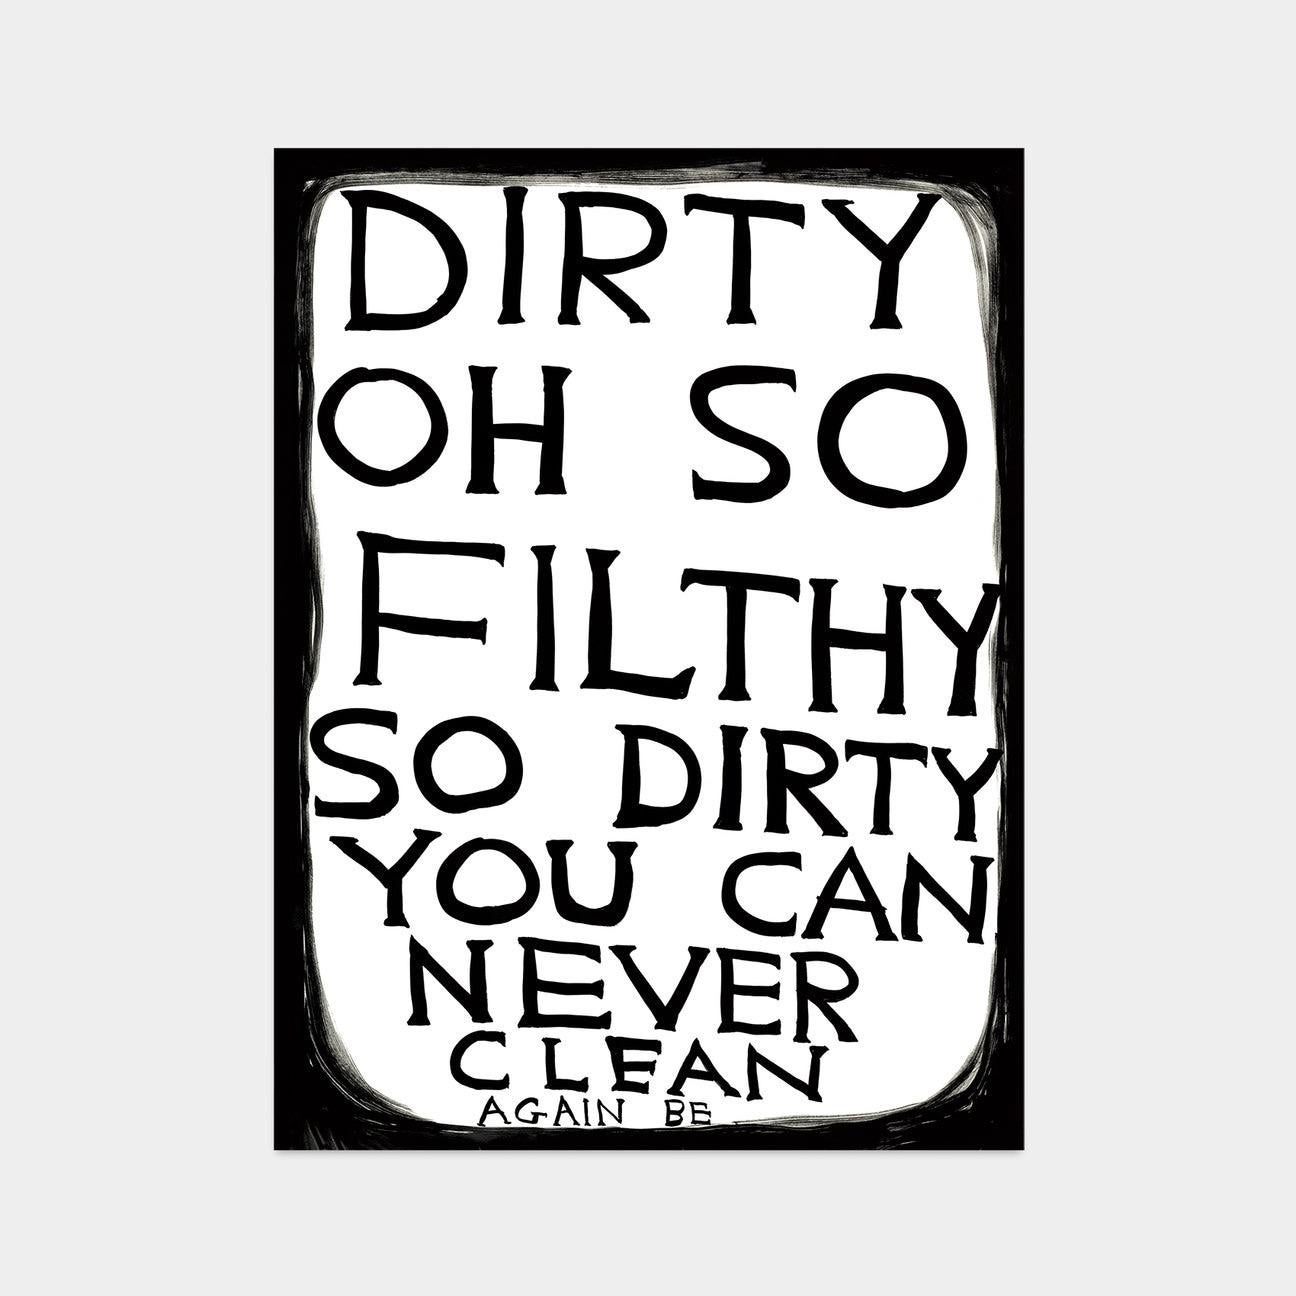 David Shrigley, Dirty Oh So Filthy, 2022

Off-set lithograph
Open edition, unframed 
50 x 70 cm (19.68 x 27.55 in) 
Printed on 200g Munken Lynx paper Narayana Press in Denmark

This print is based on the original acrylic work on paper by David